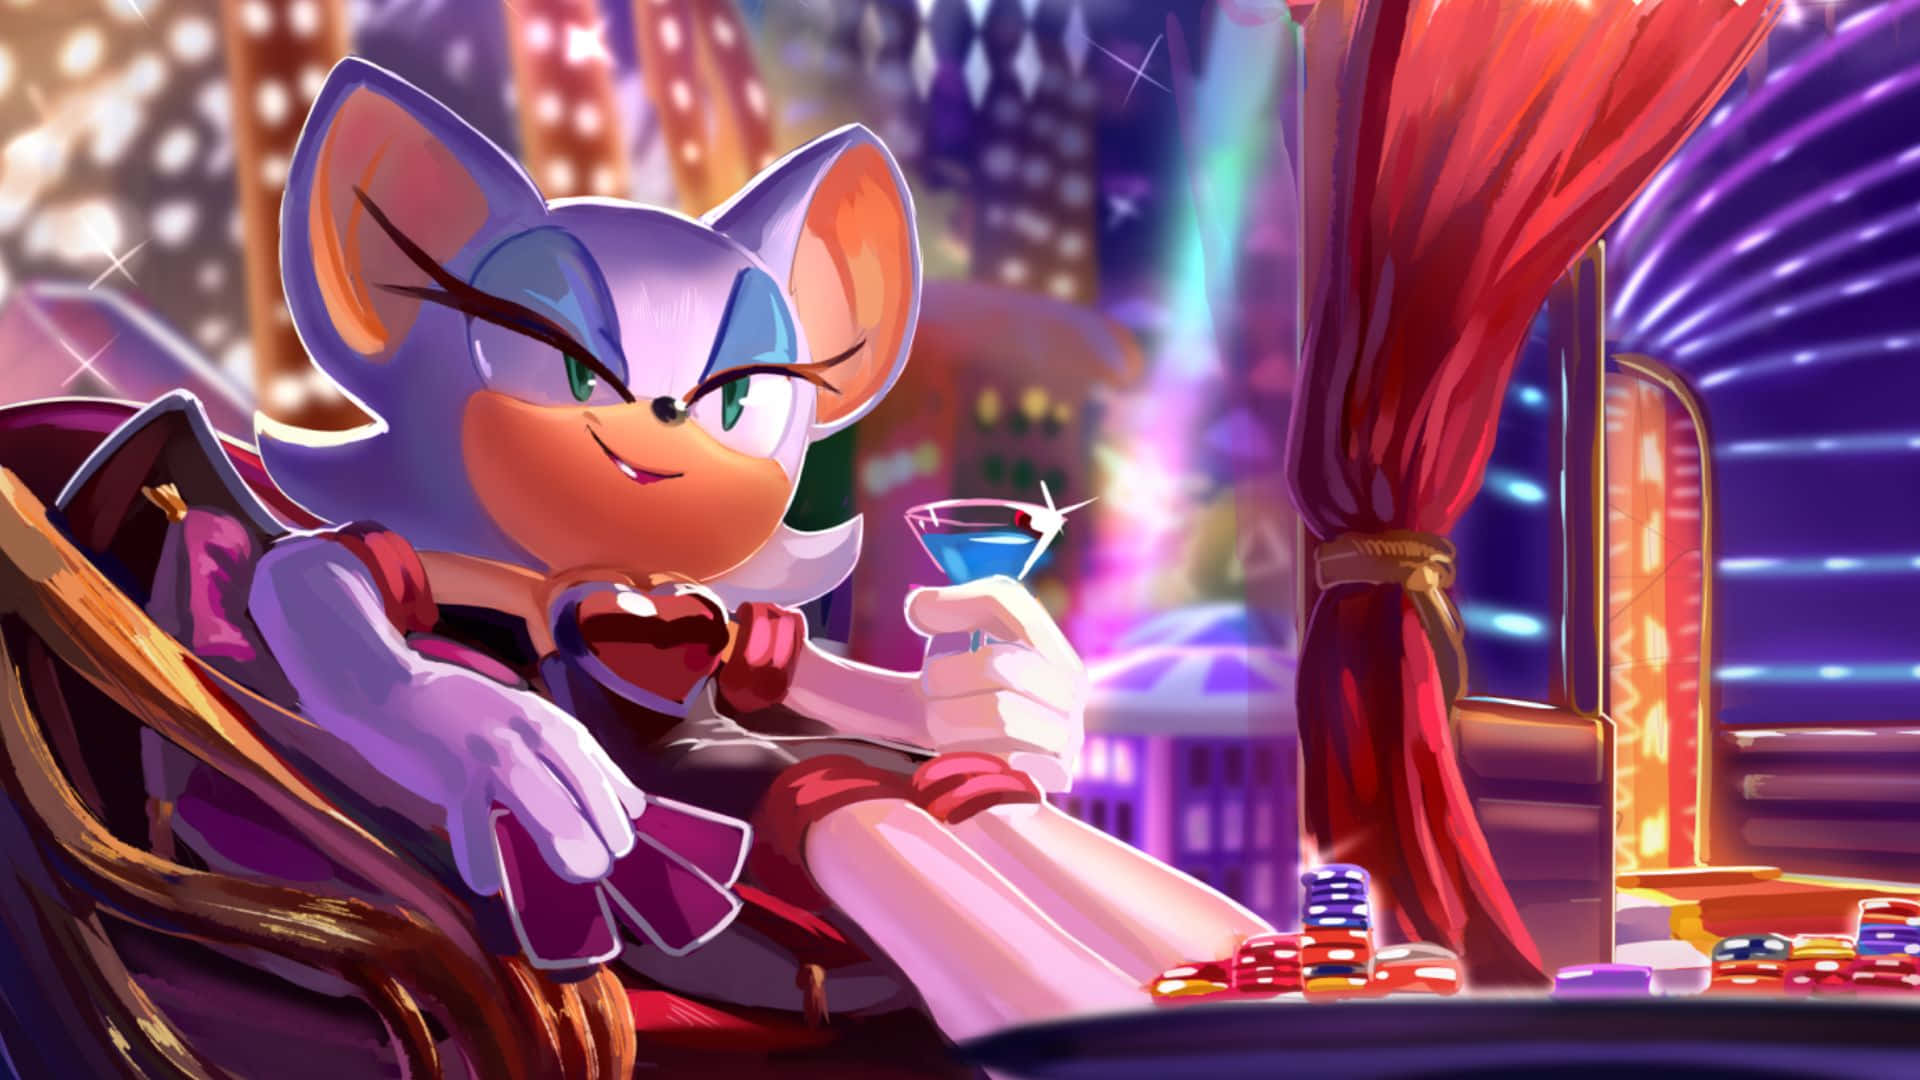 Rouge the Bat striking a pose in action-packed scene Wallpaper